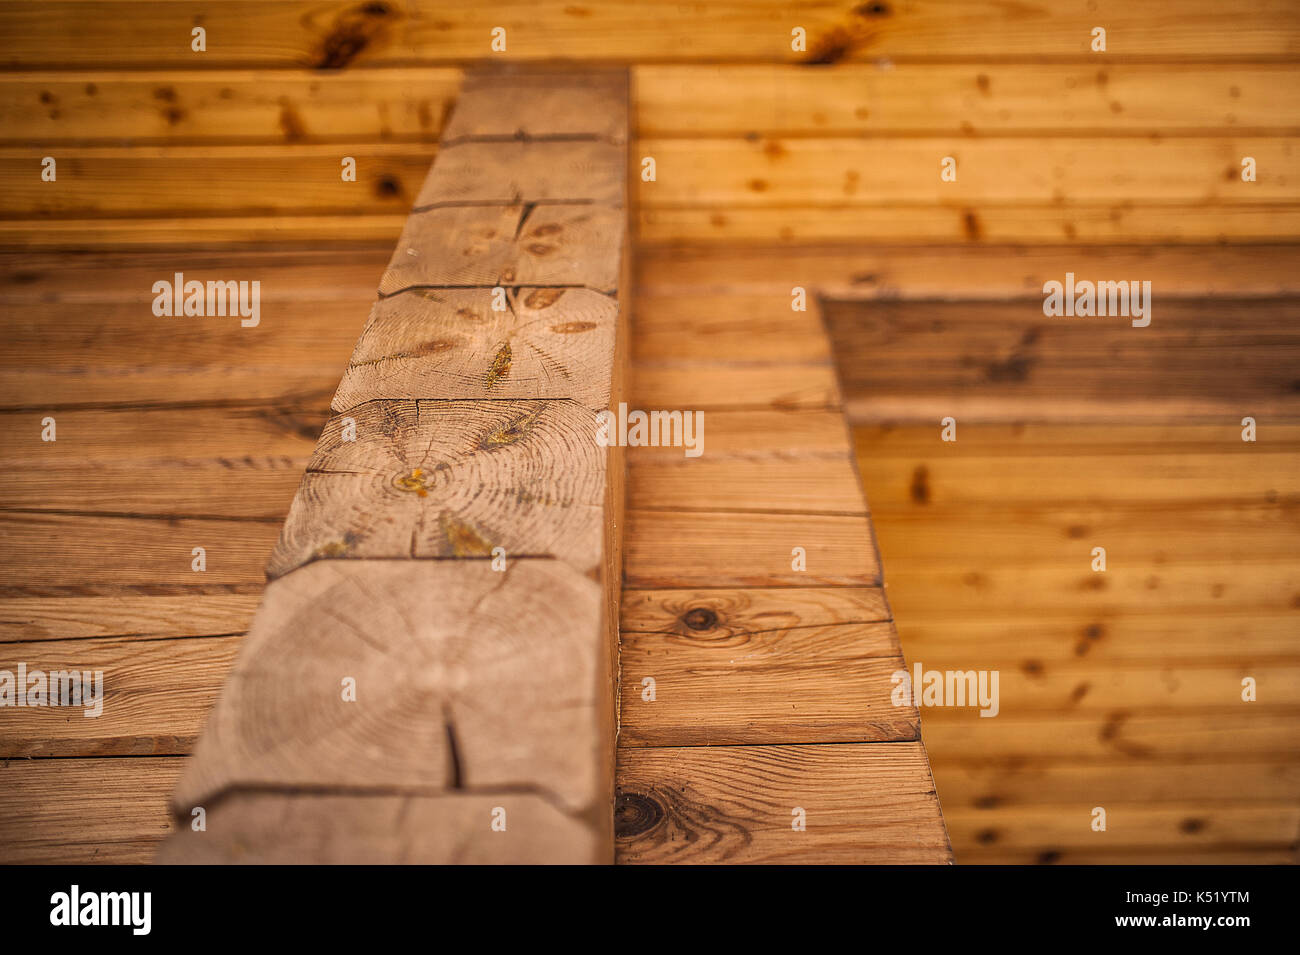 Texture - wooden boards brown color. Texture of a wooden wall from a bar. at intersection another view from afar Stock Photo